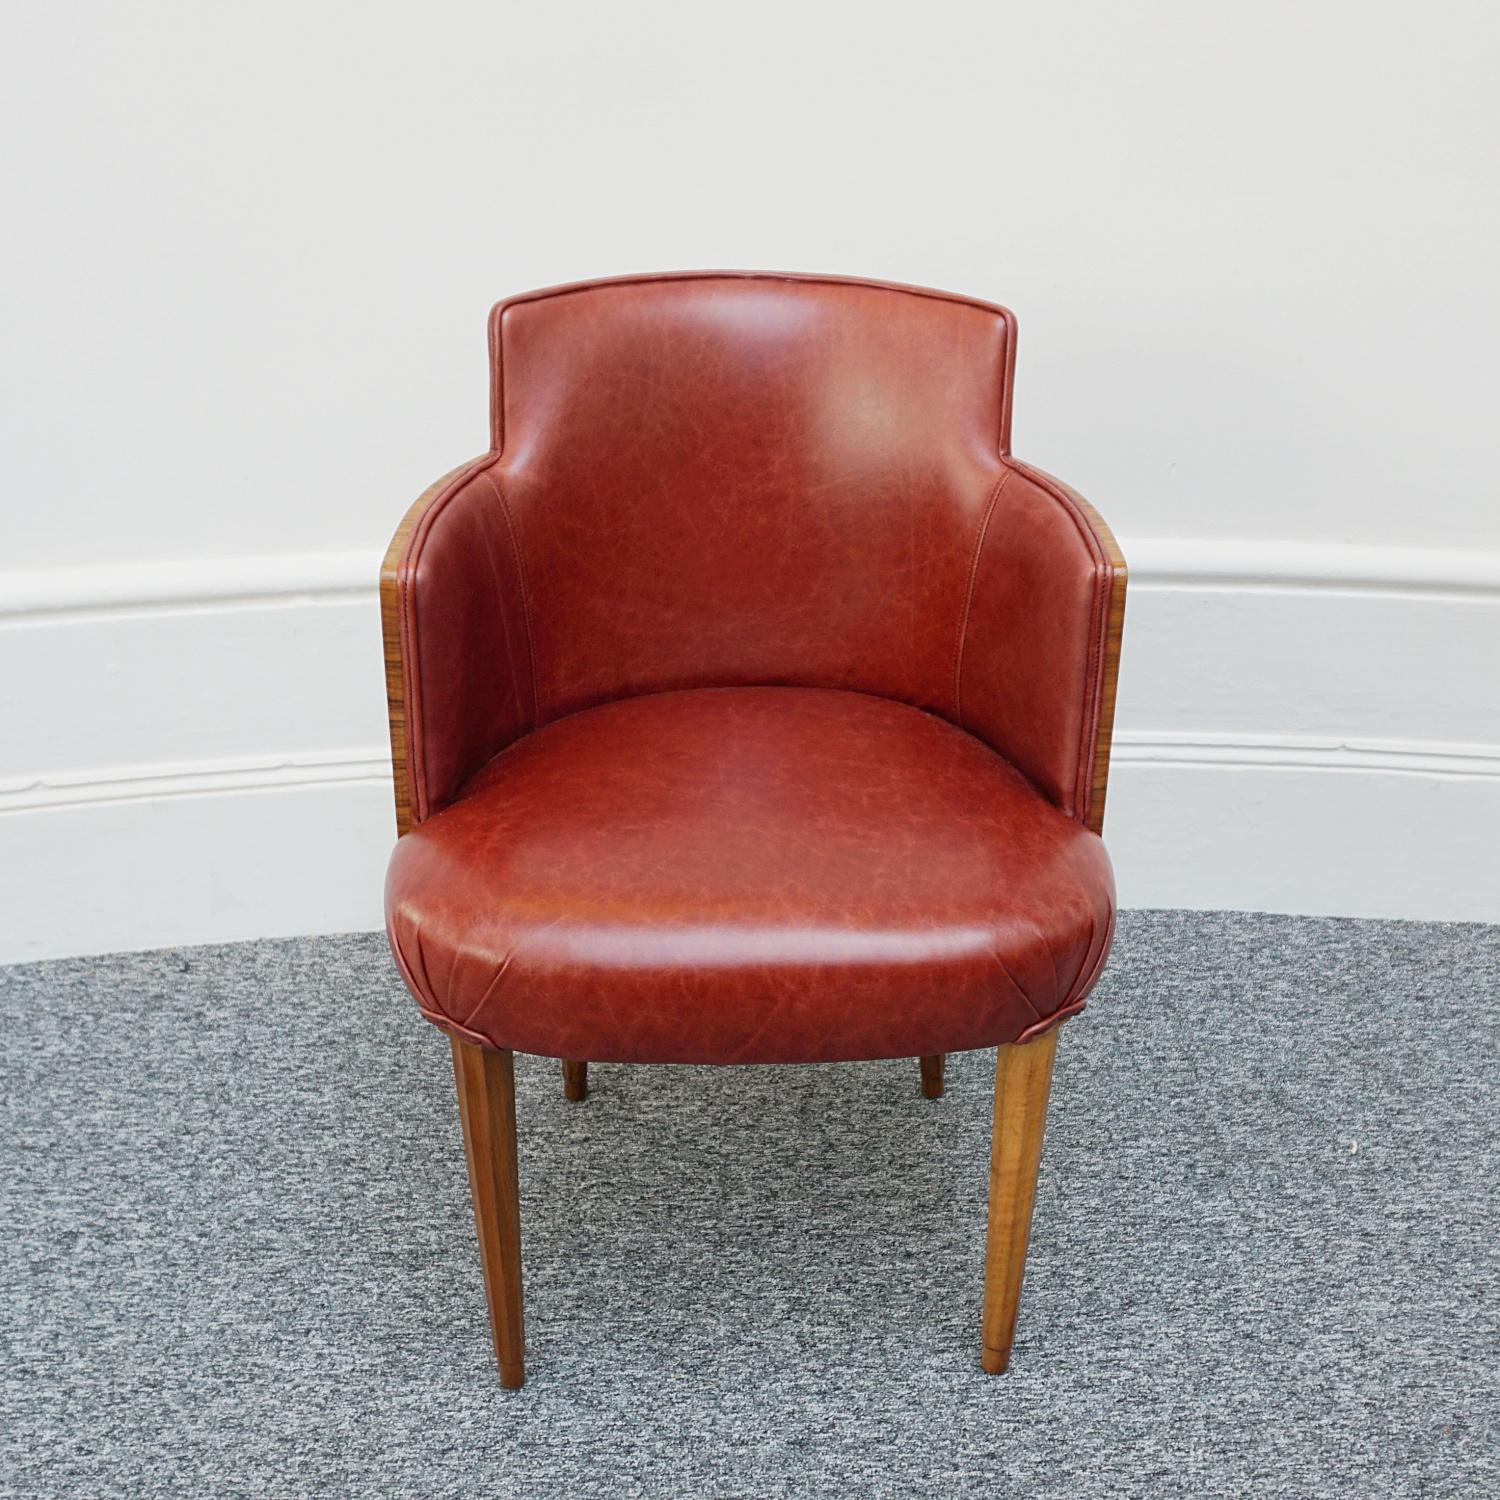 An Art Deco Tub Chair. Walnut veneered with solid walnut legs. Re-upholstered in red leather. 

Dimensions: H 80cm W 54cm D 46cm Seat H 46cm

Origin: English

Date: Circa 1935

Item Number: 3005232

All of our furniture is extensively